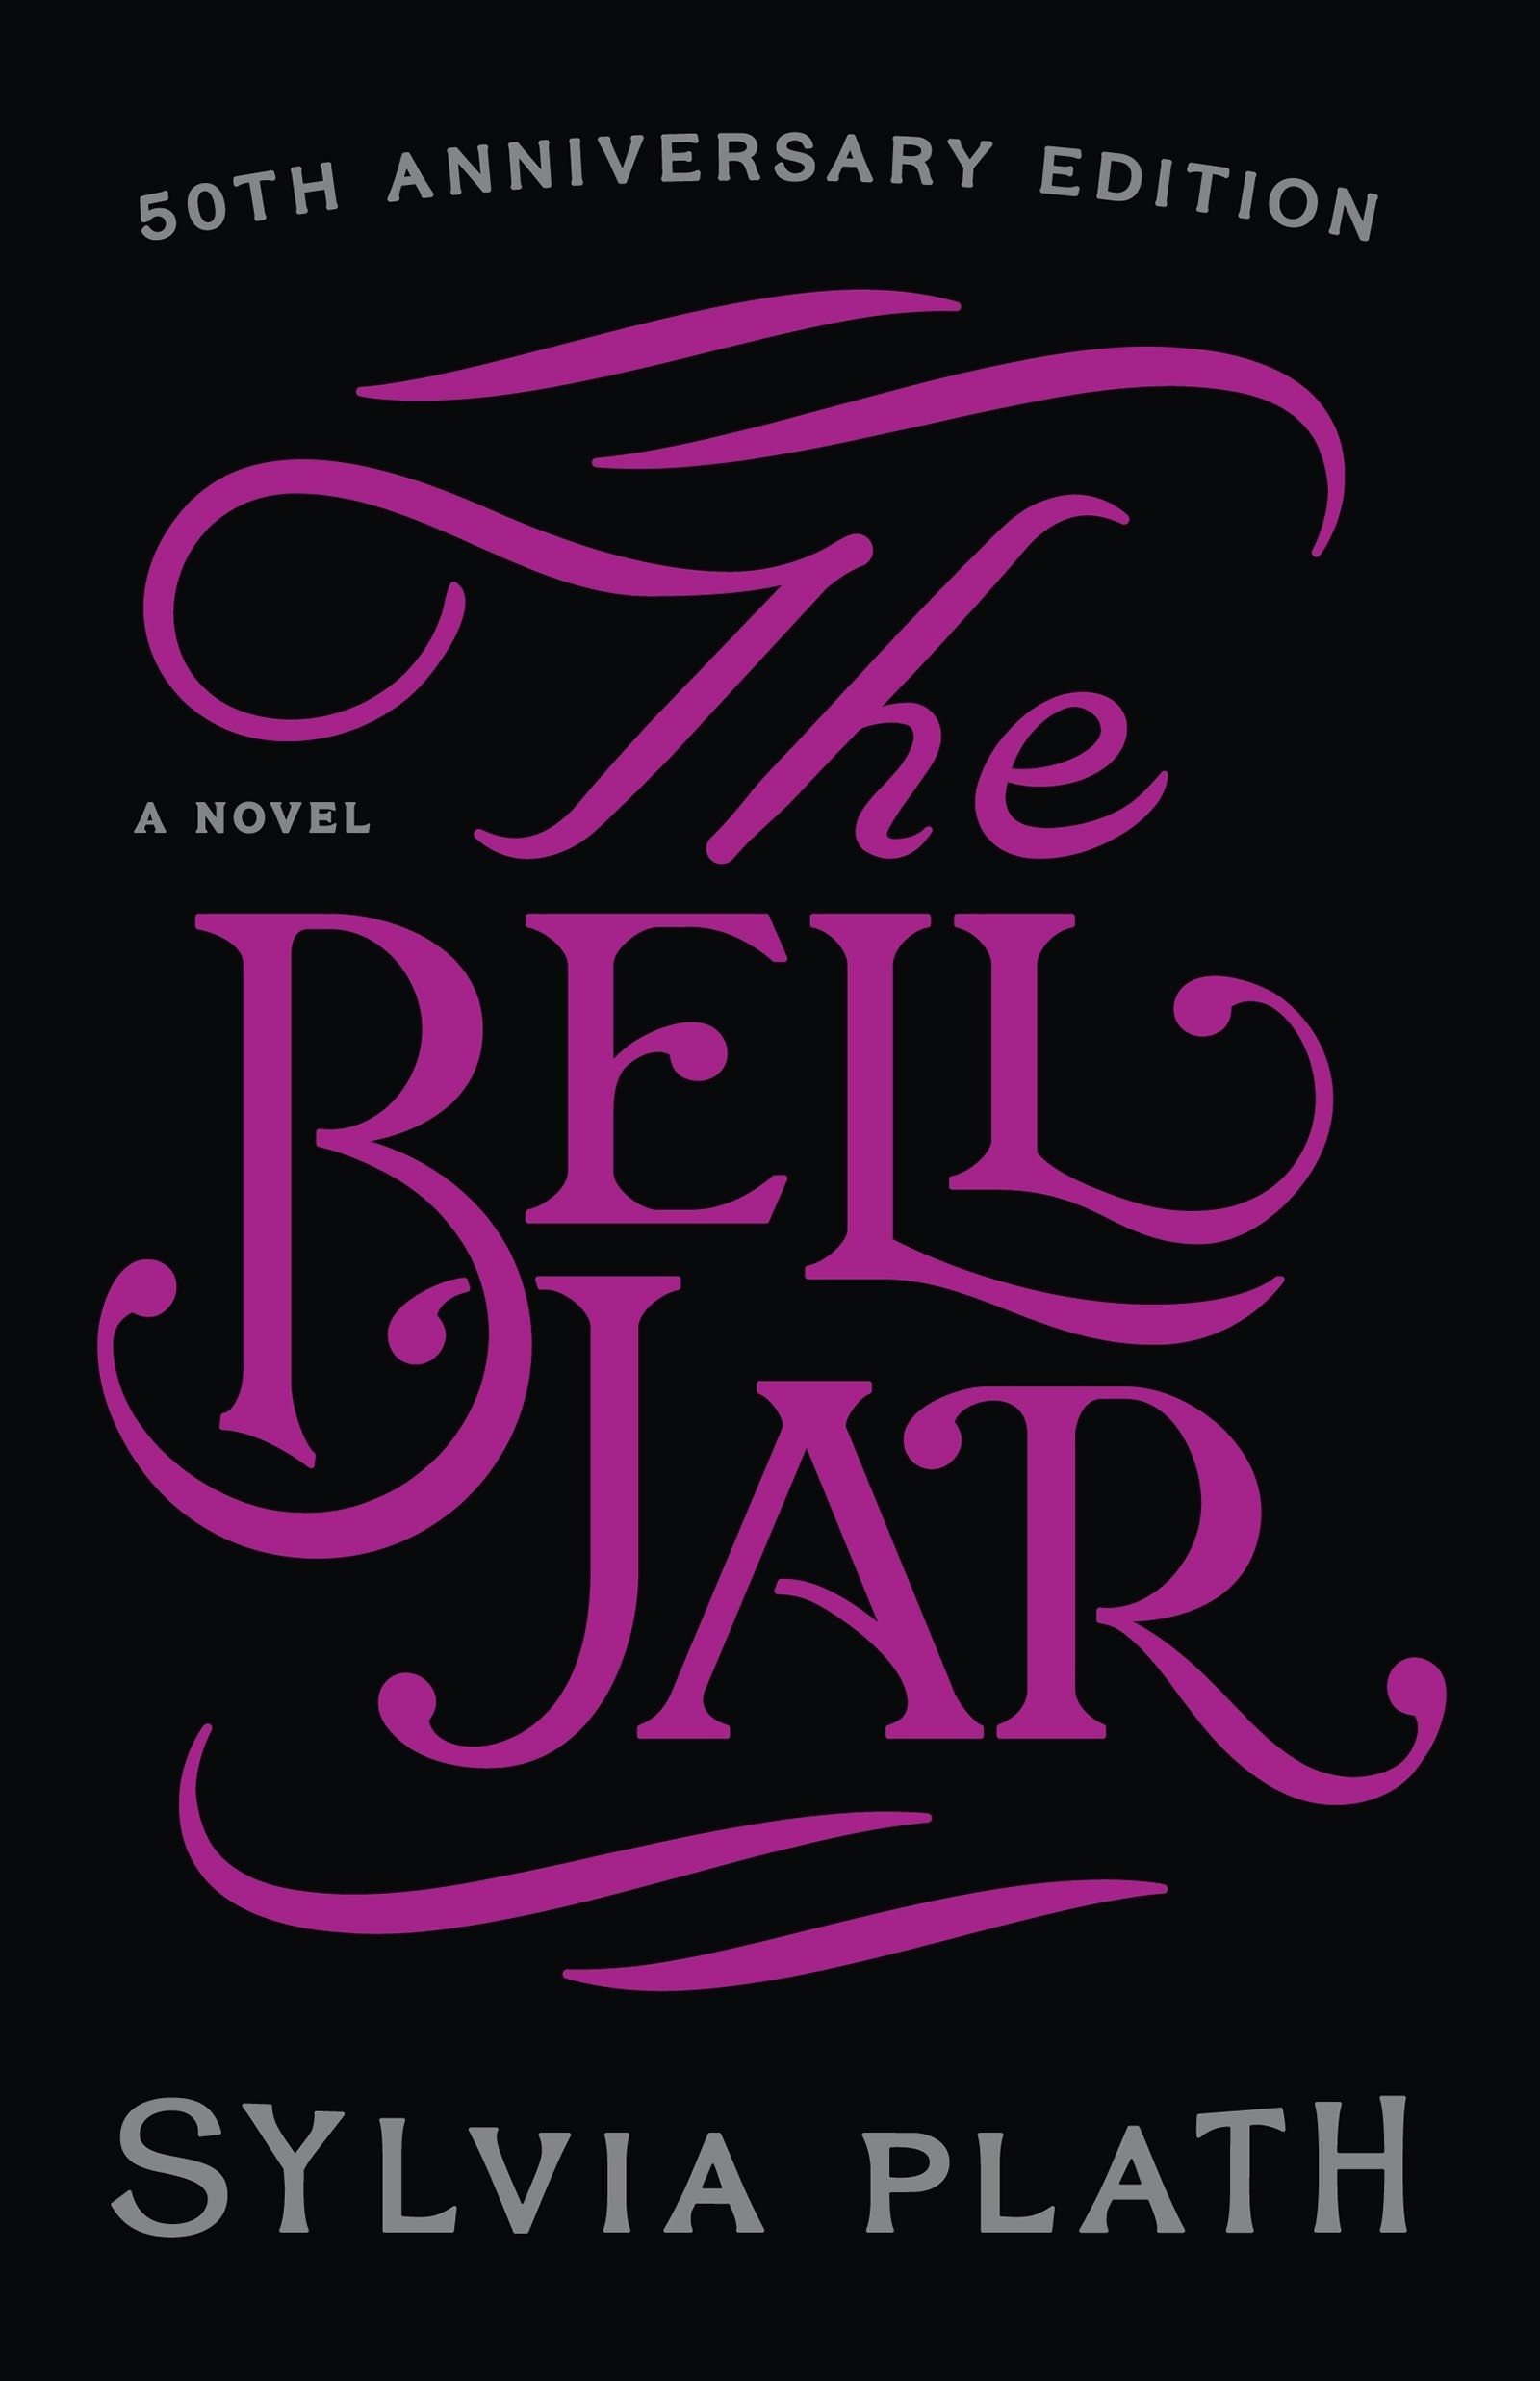 the bell jar in a cursive pink font against a black background